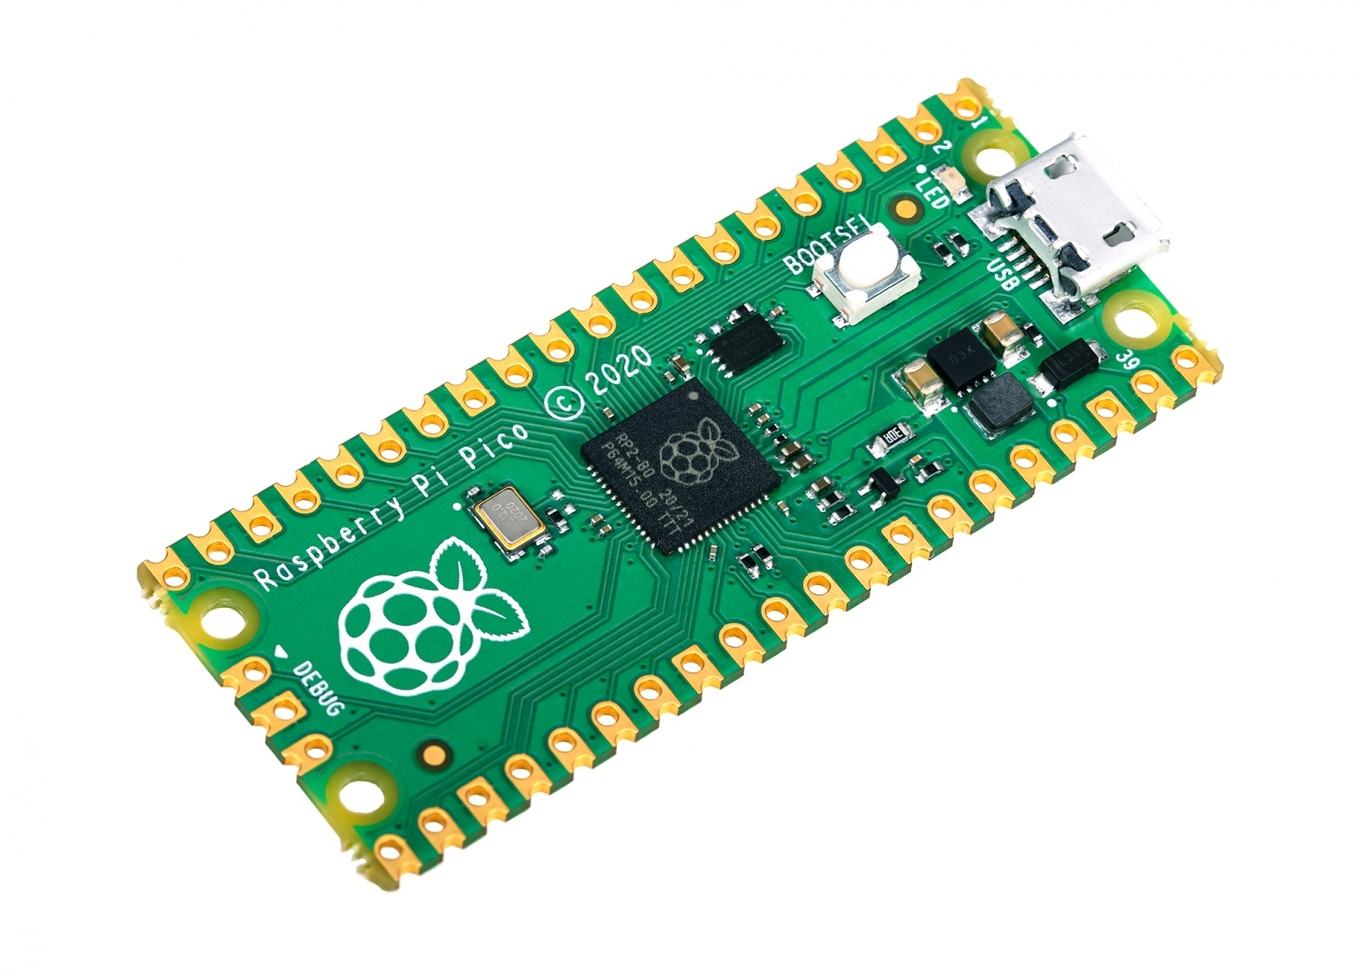 rp2040-microcontroller-board:-raspberry-pi-pico-costs-from-4-euros